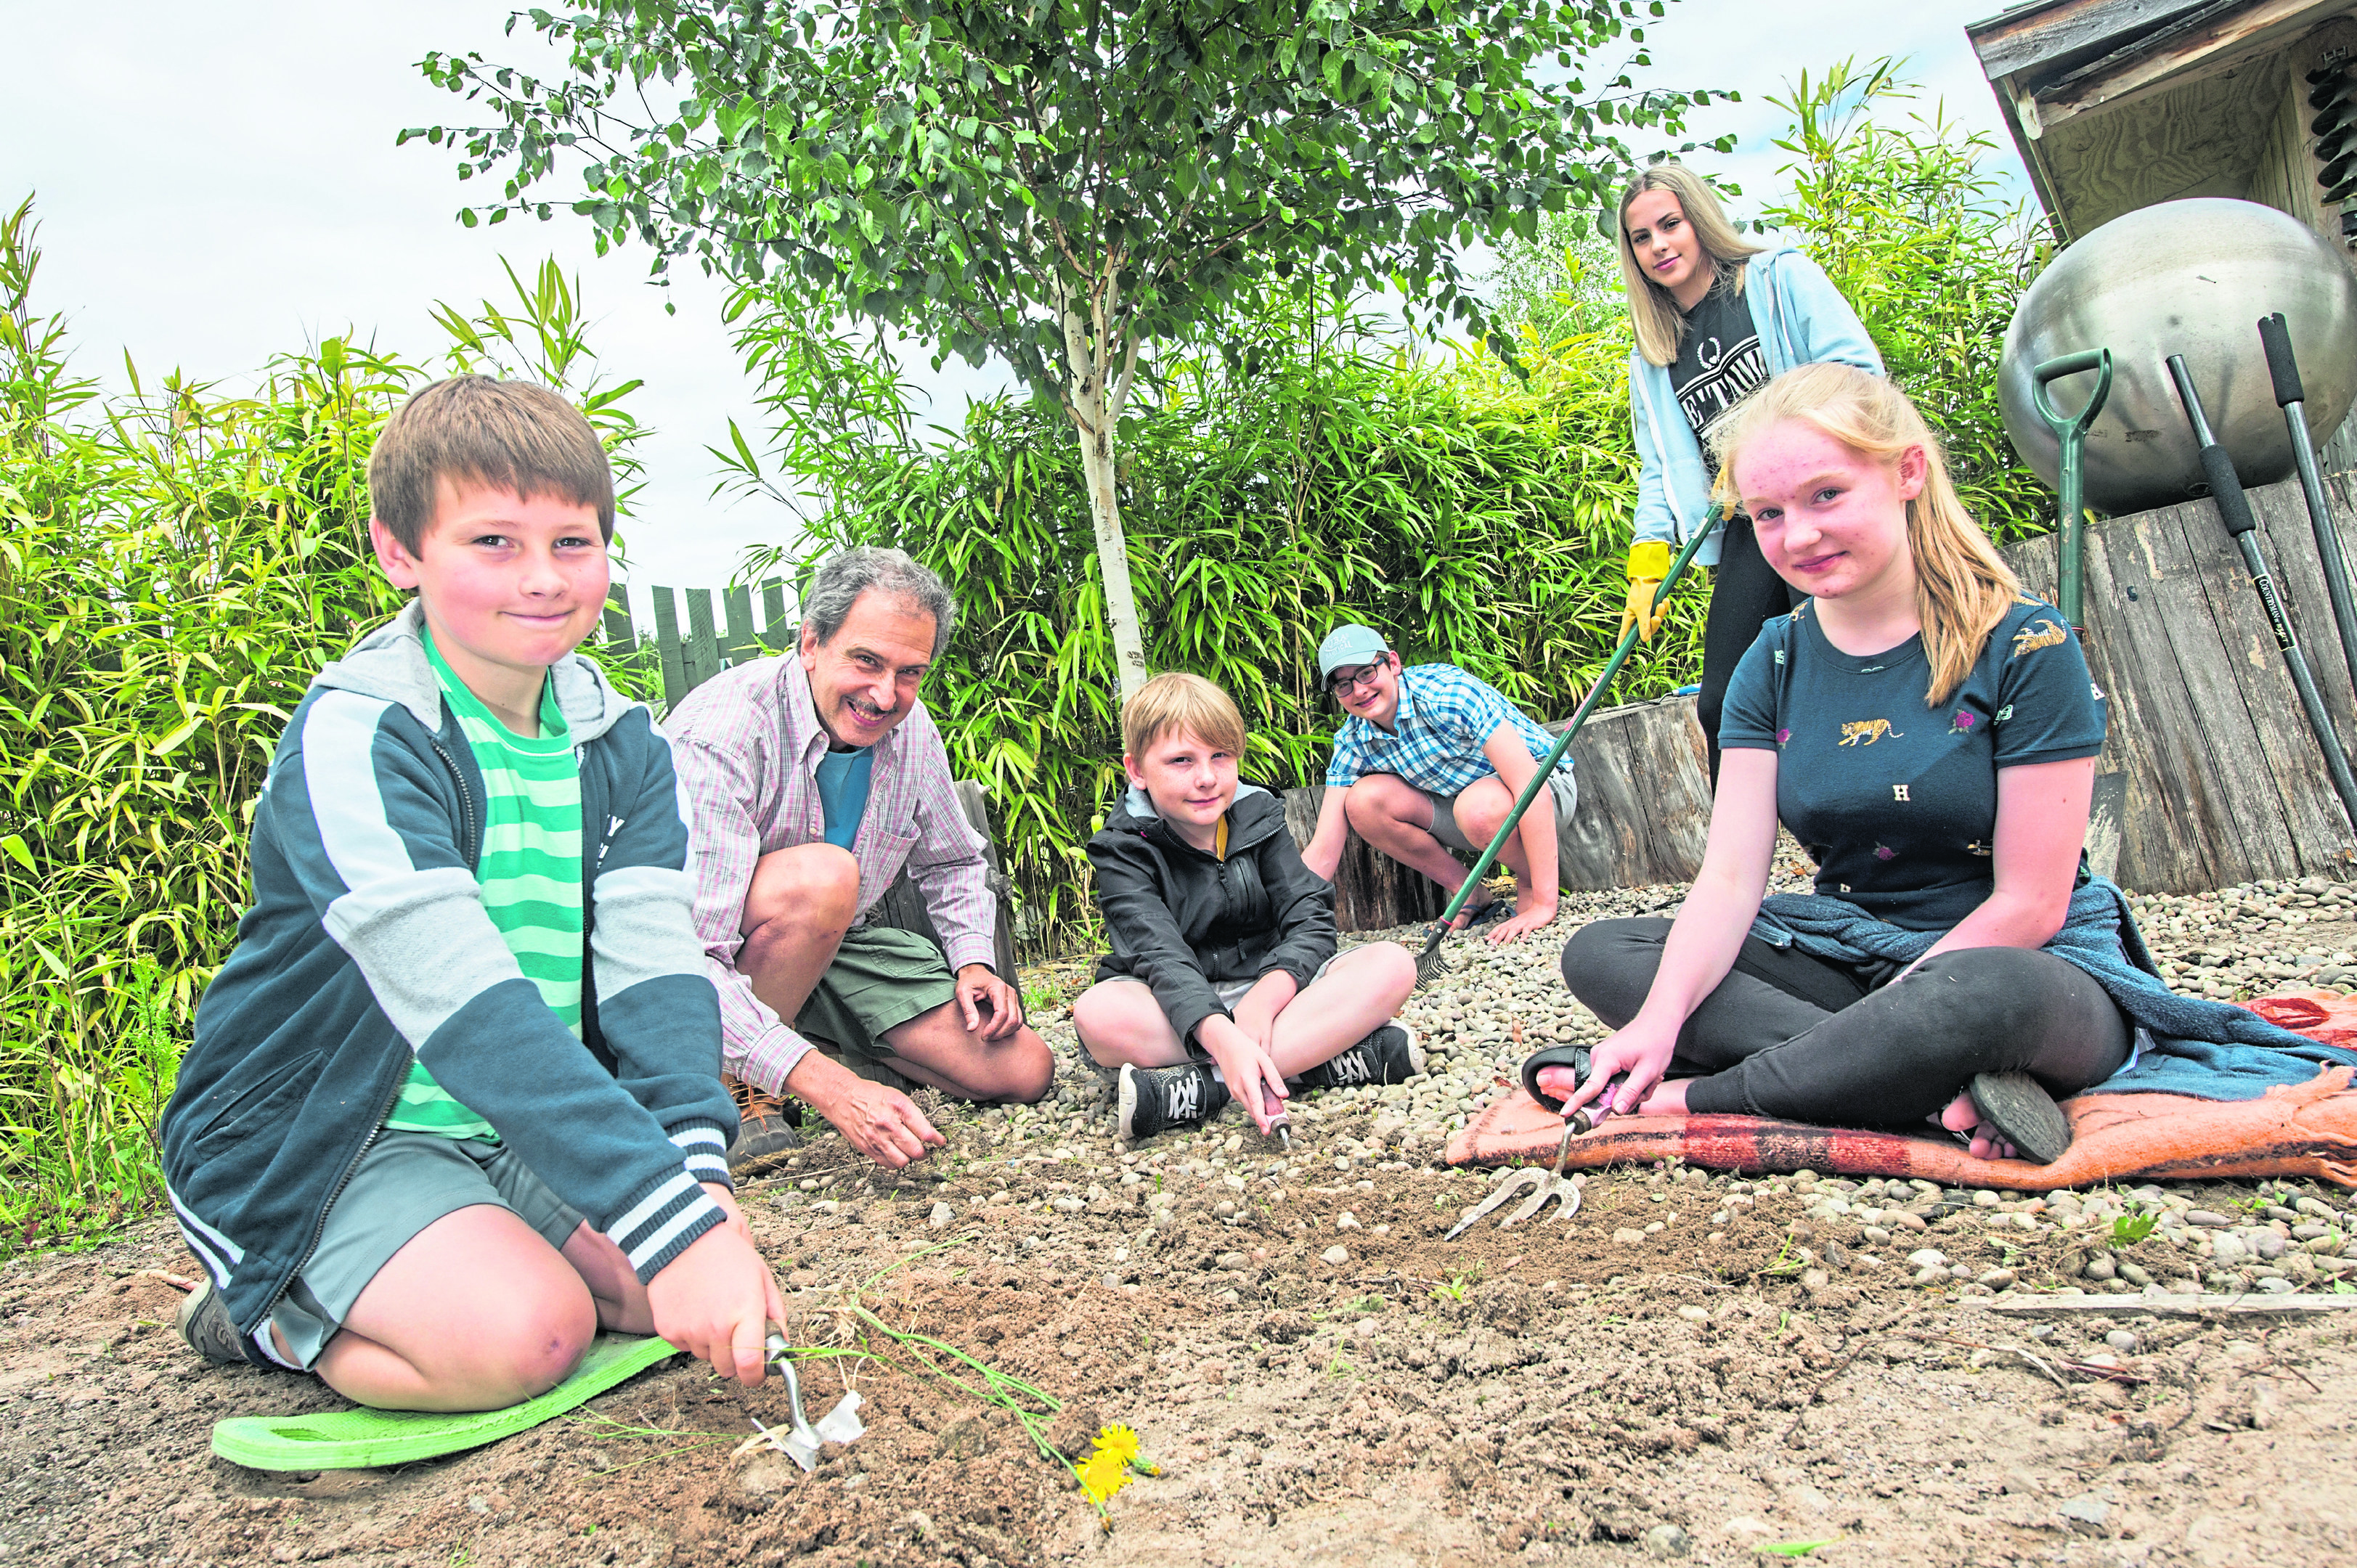 Children and adults alike volunteer to help tidy up the garden at Moray Arts Centre, Findhorn.

Picture by Jason Hedges.